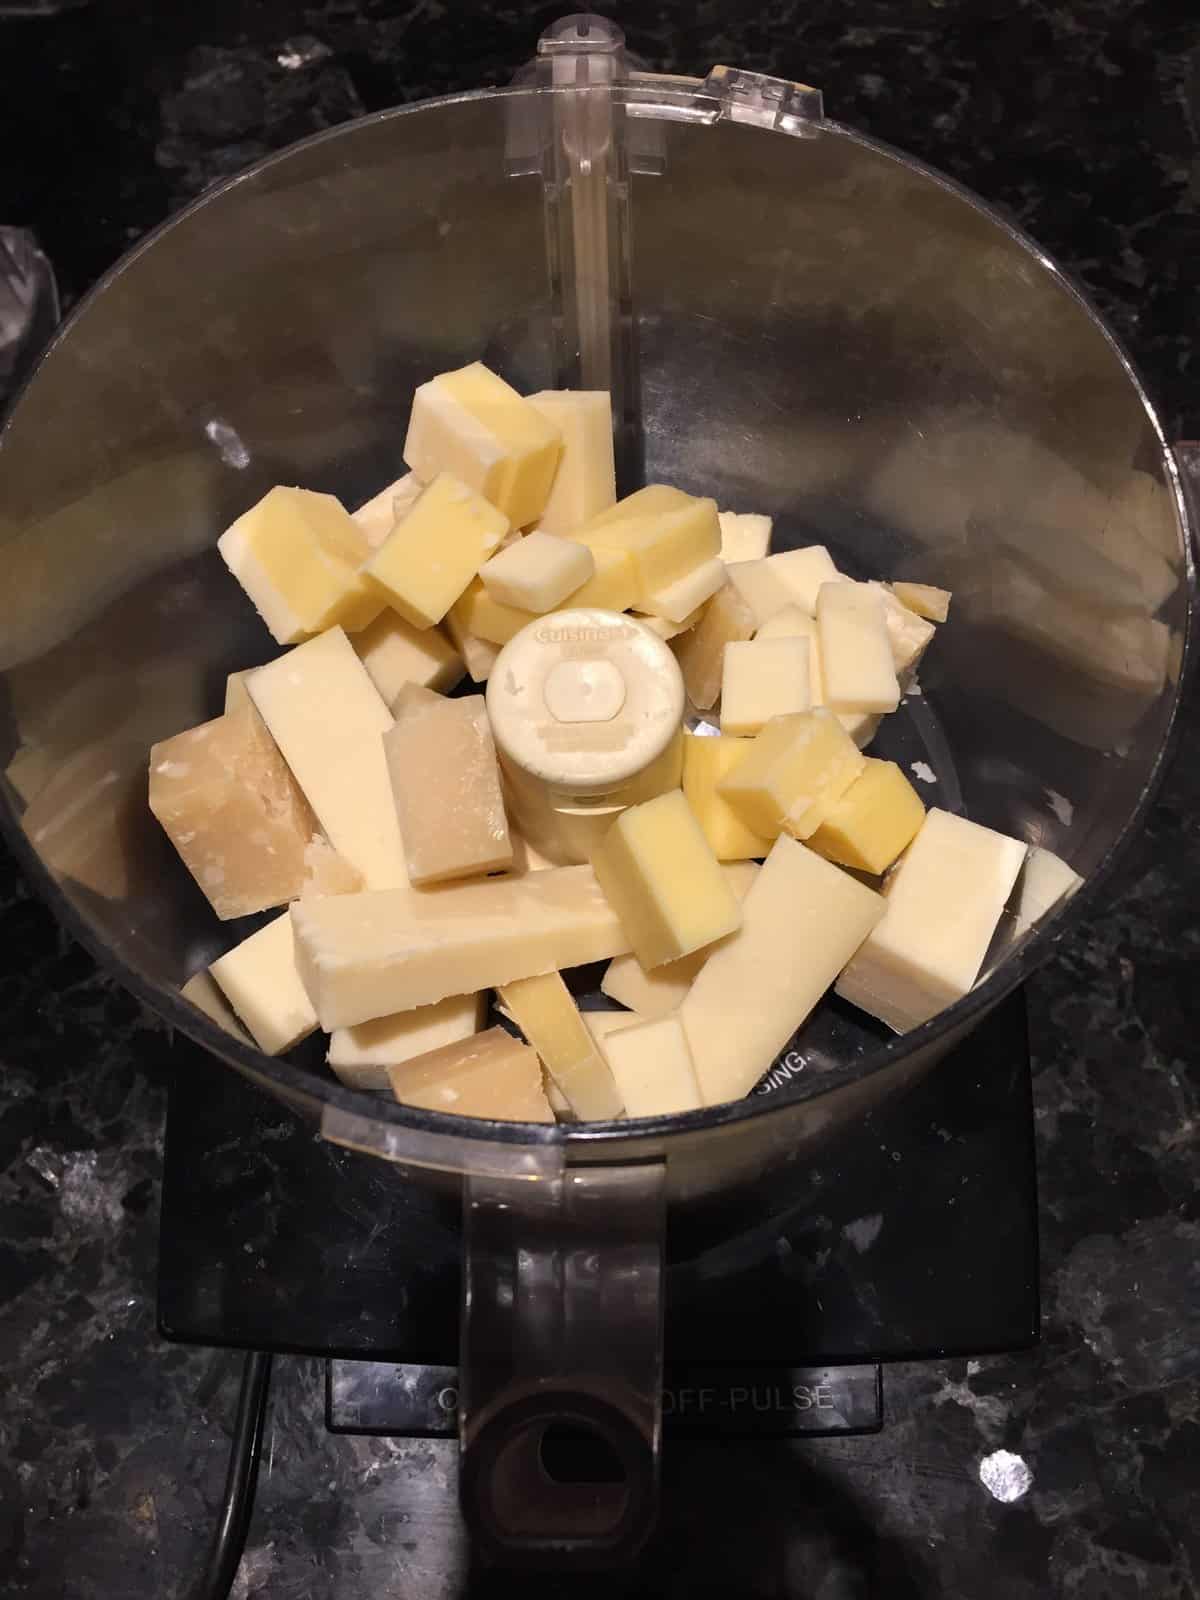 cubes of cheese in a food processor.